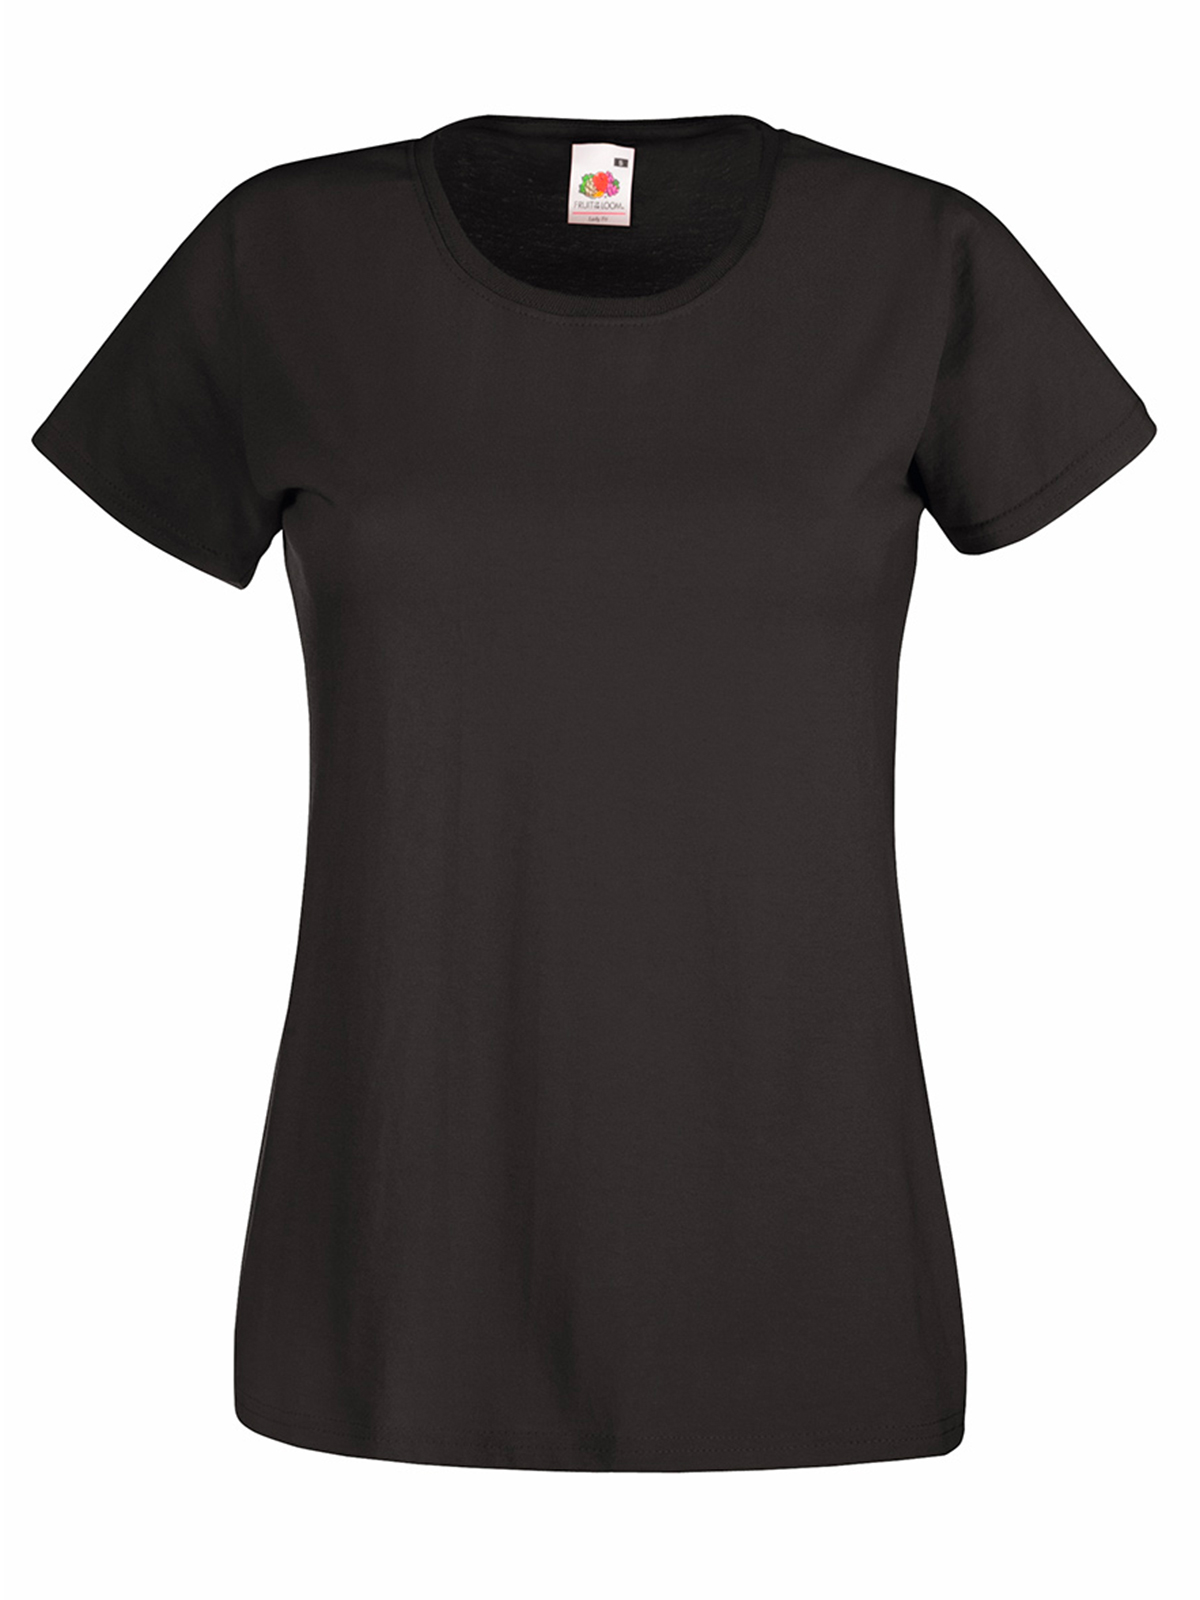 ladies-valueweight-t-charcoal.webp